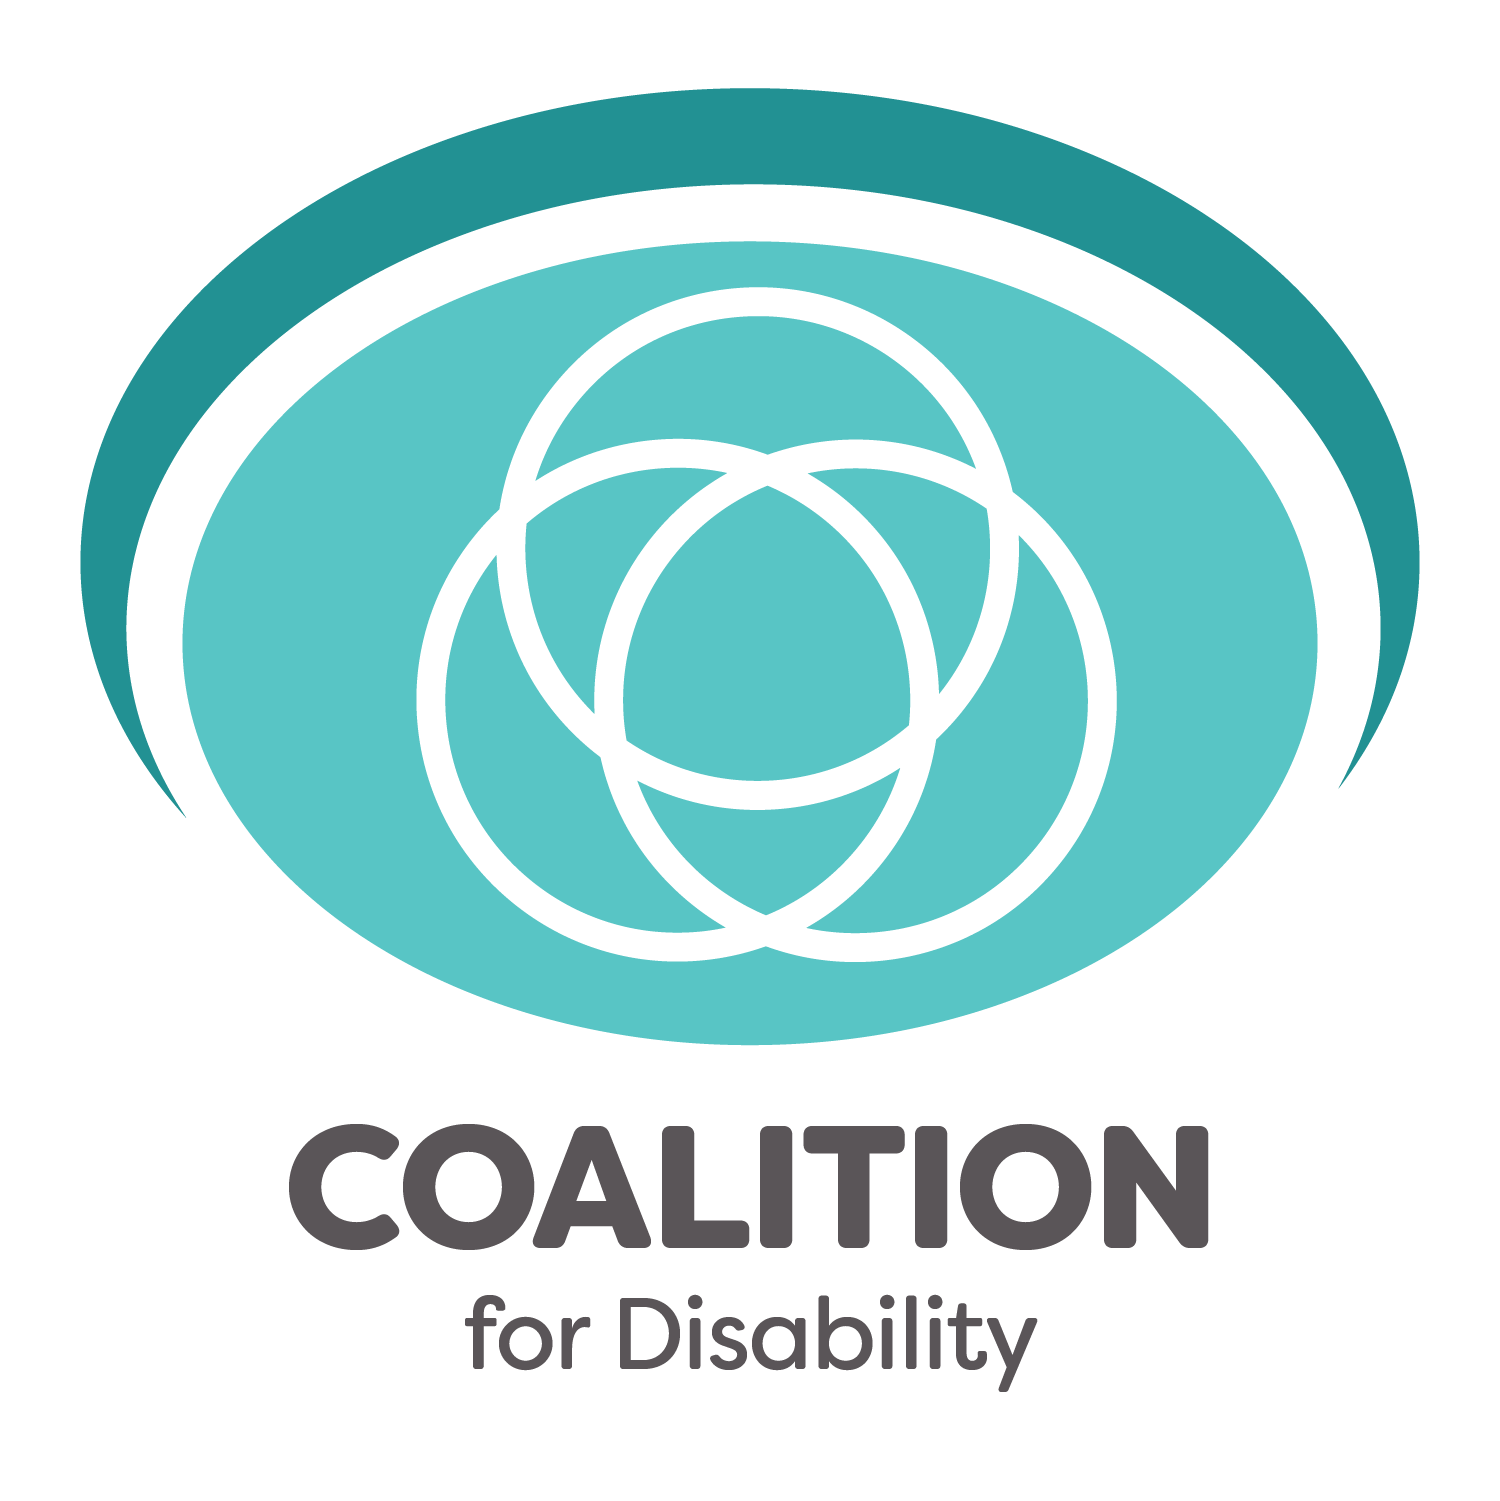 Coalition for Disability logo